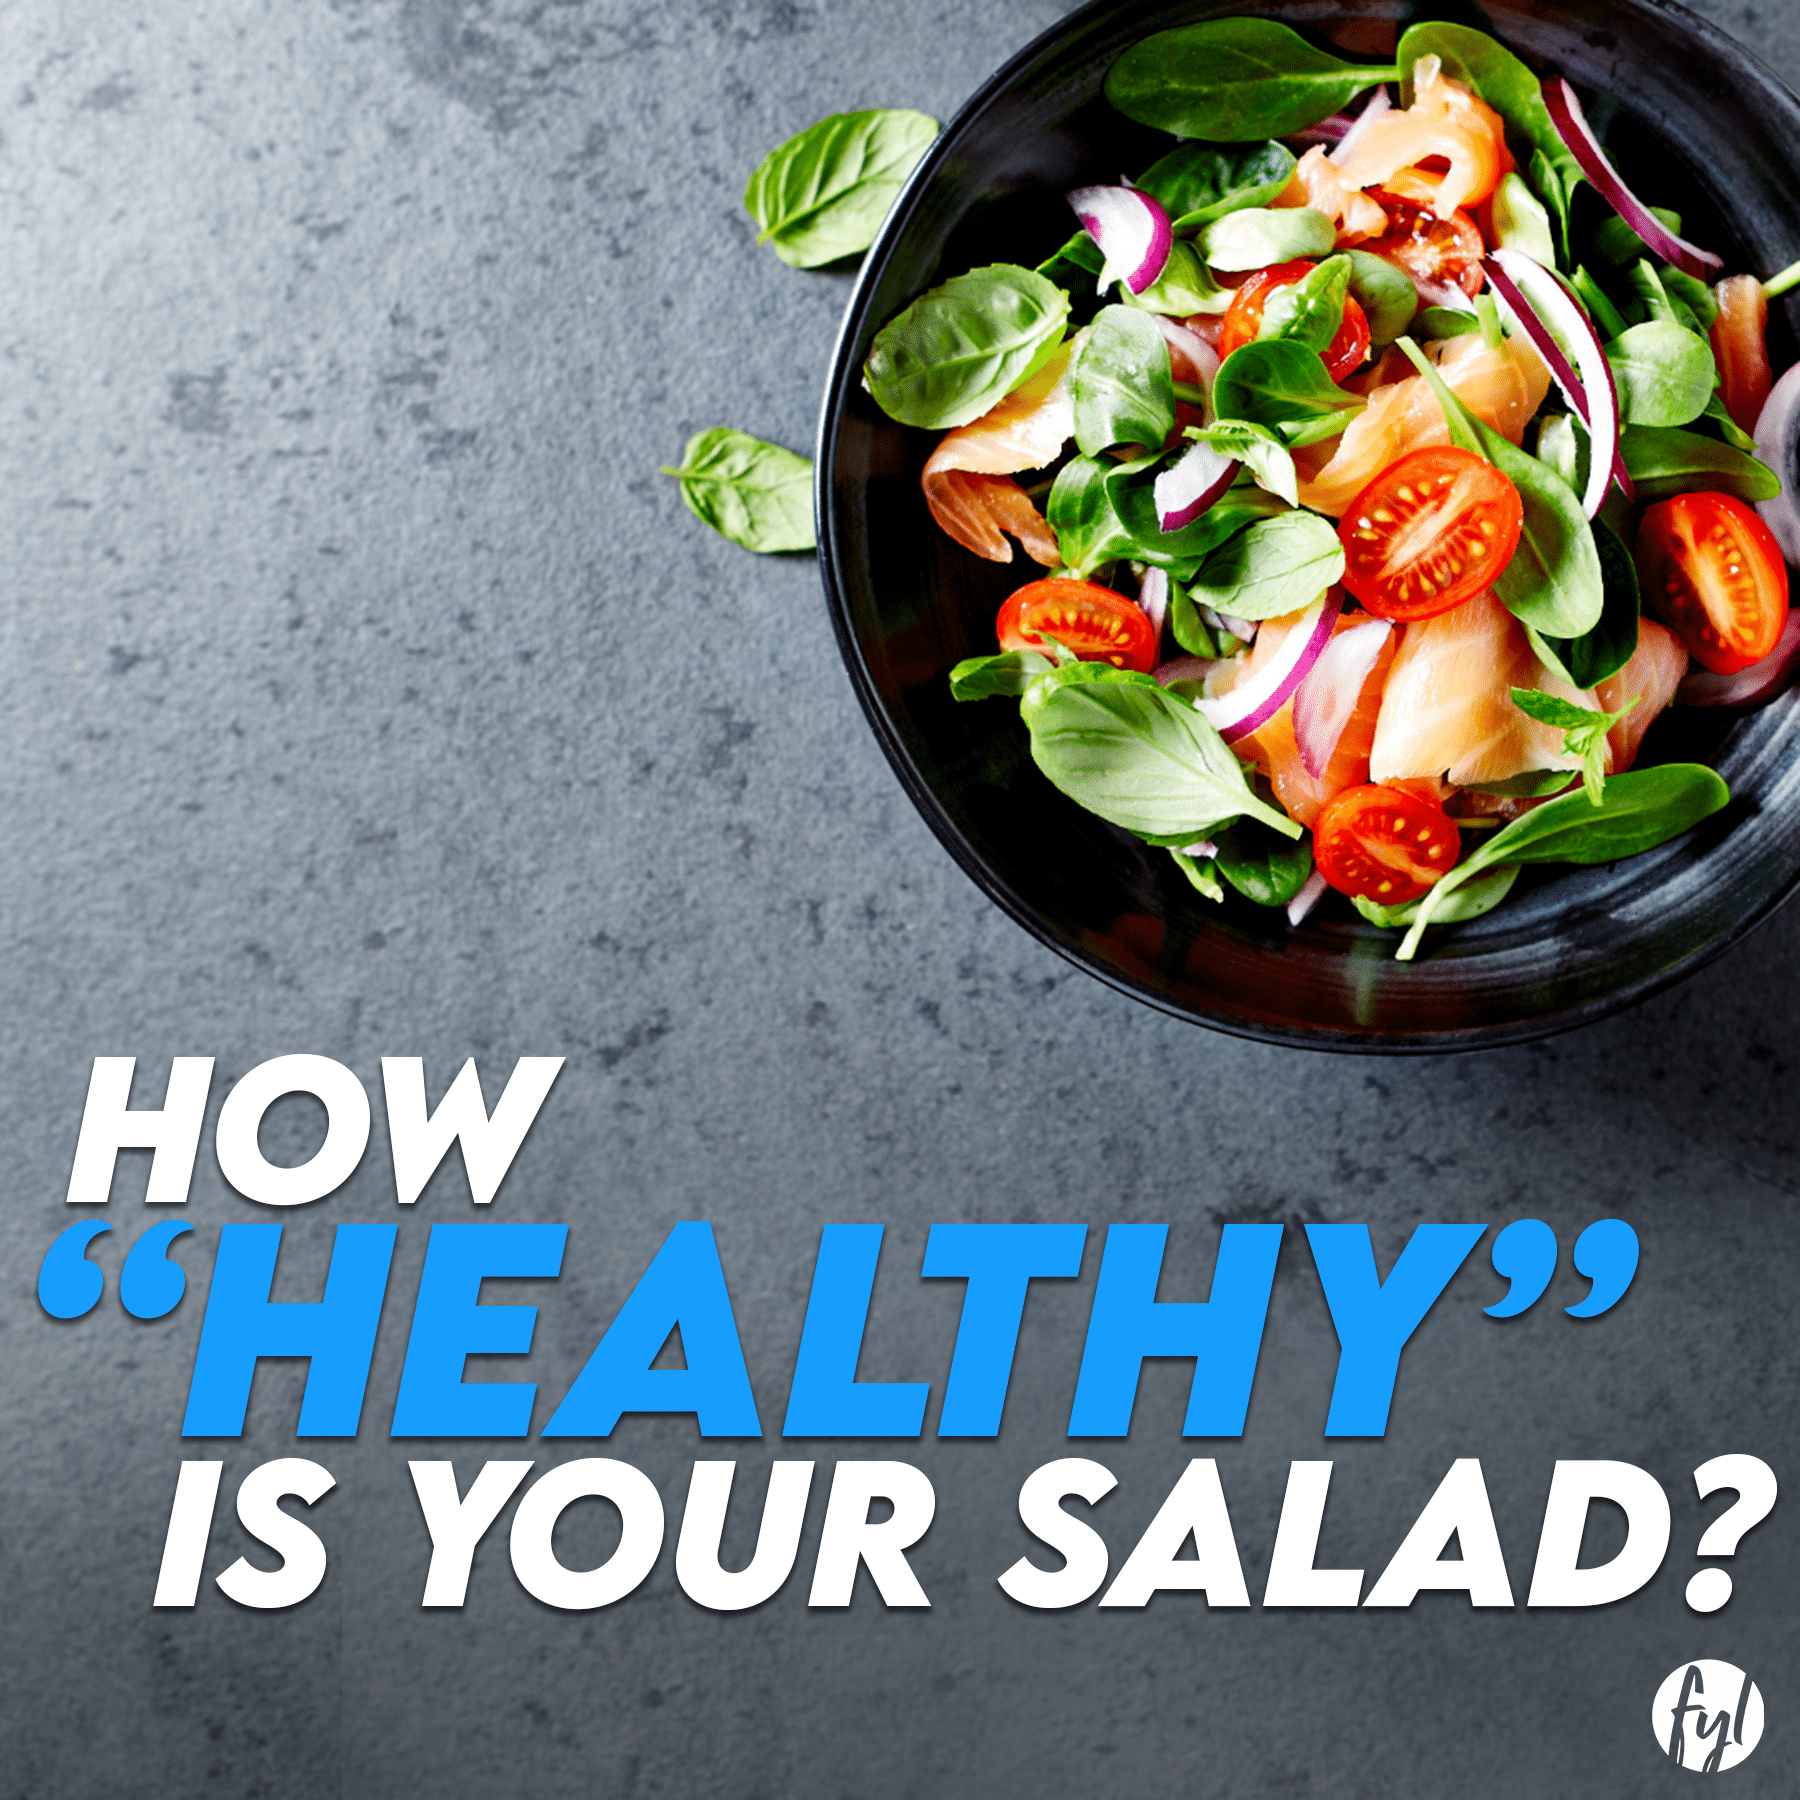 How “Healthy” Is Your Salad?